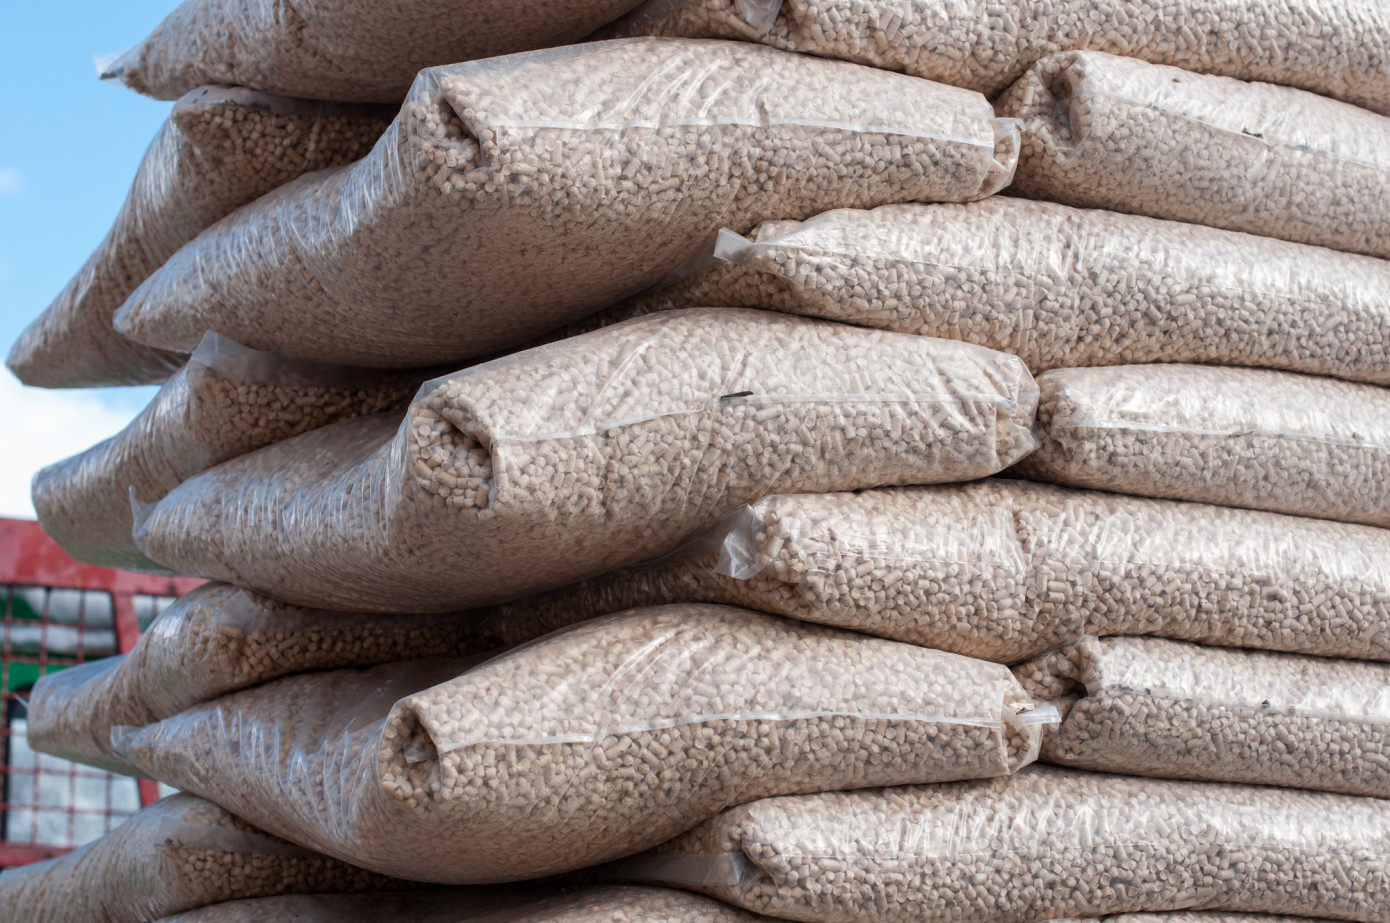 Canadian export wood pellets price down 2.1% in July 2021